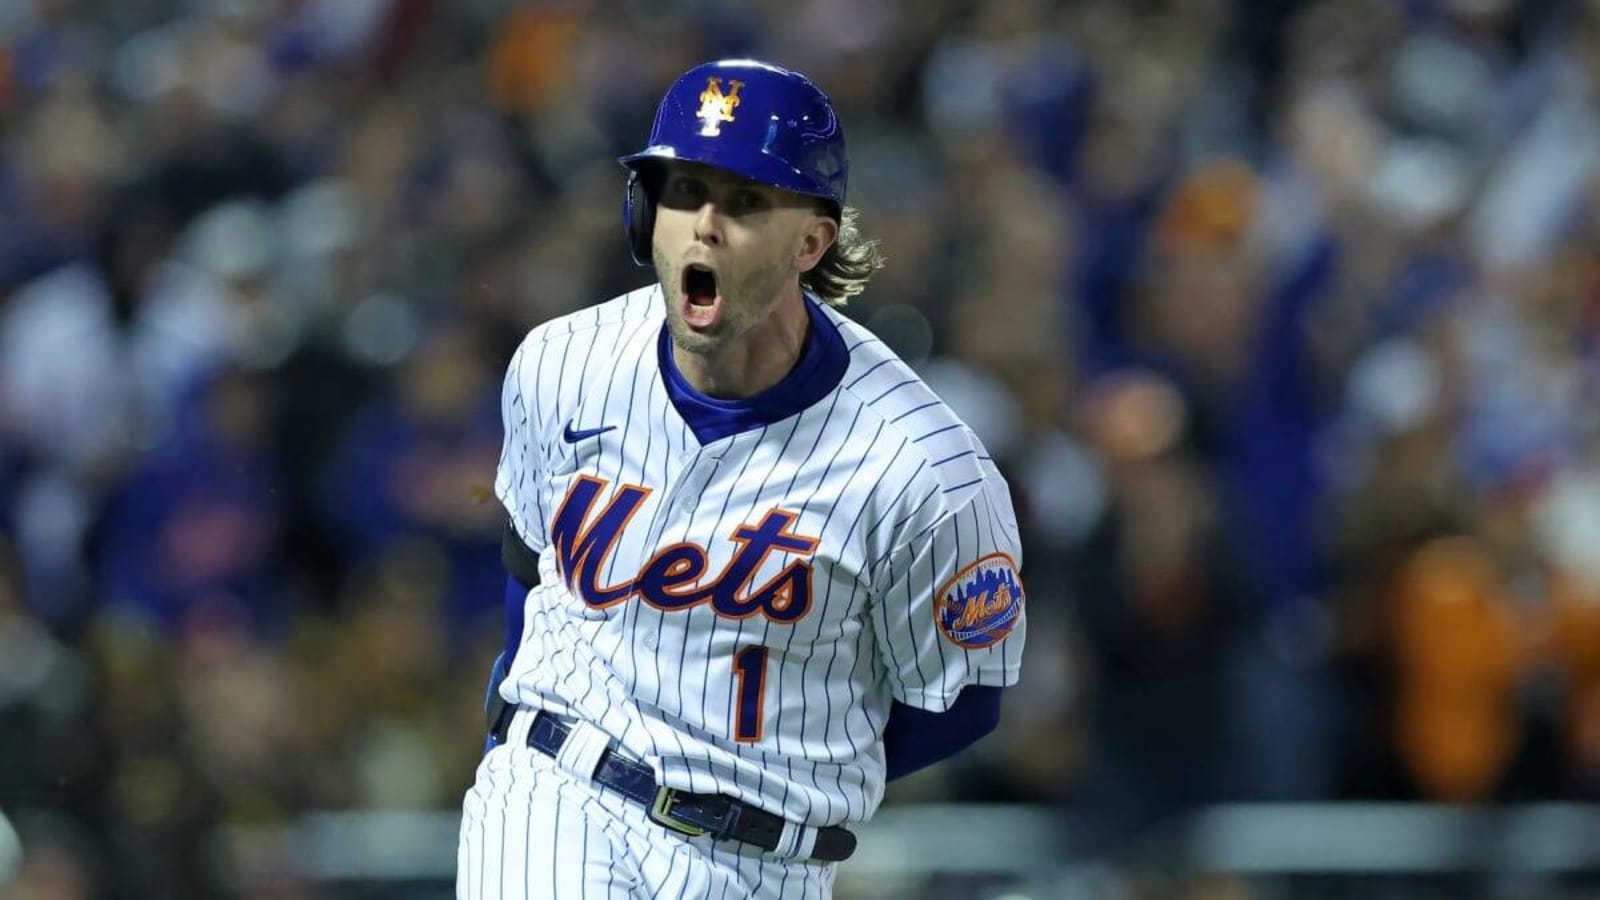 OPINION: New York Mets Get a Bargain with Jeff McNeil Extension